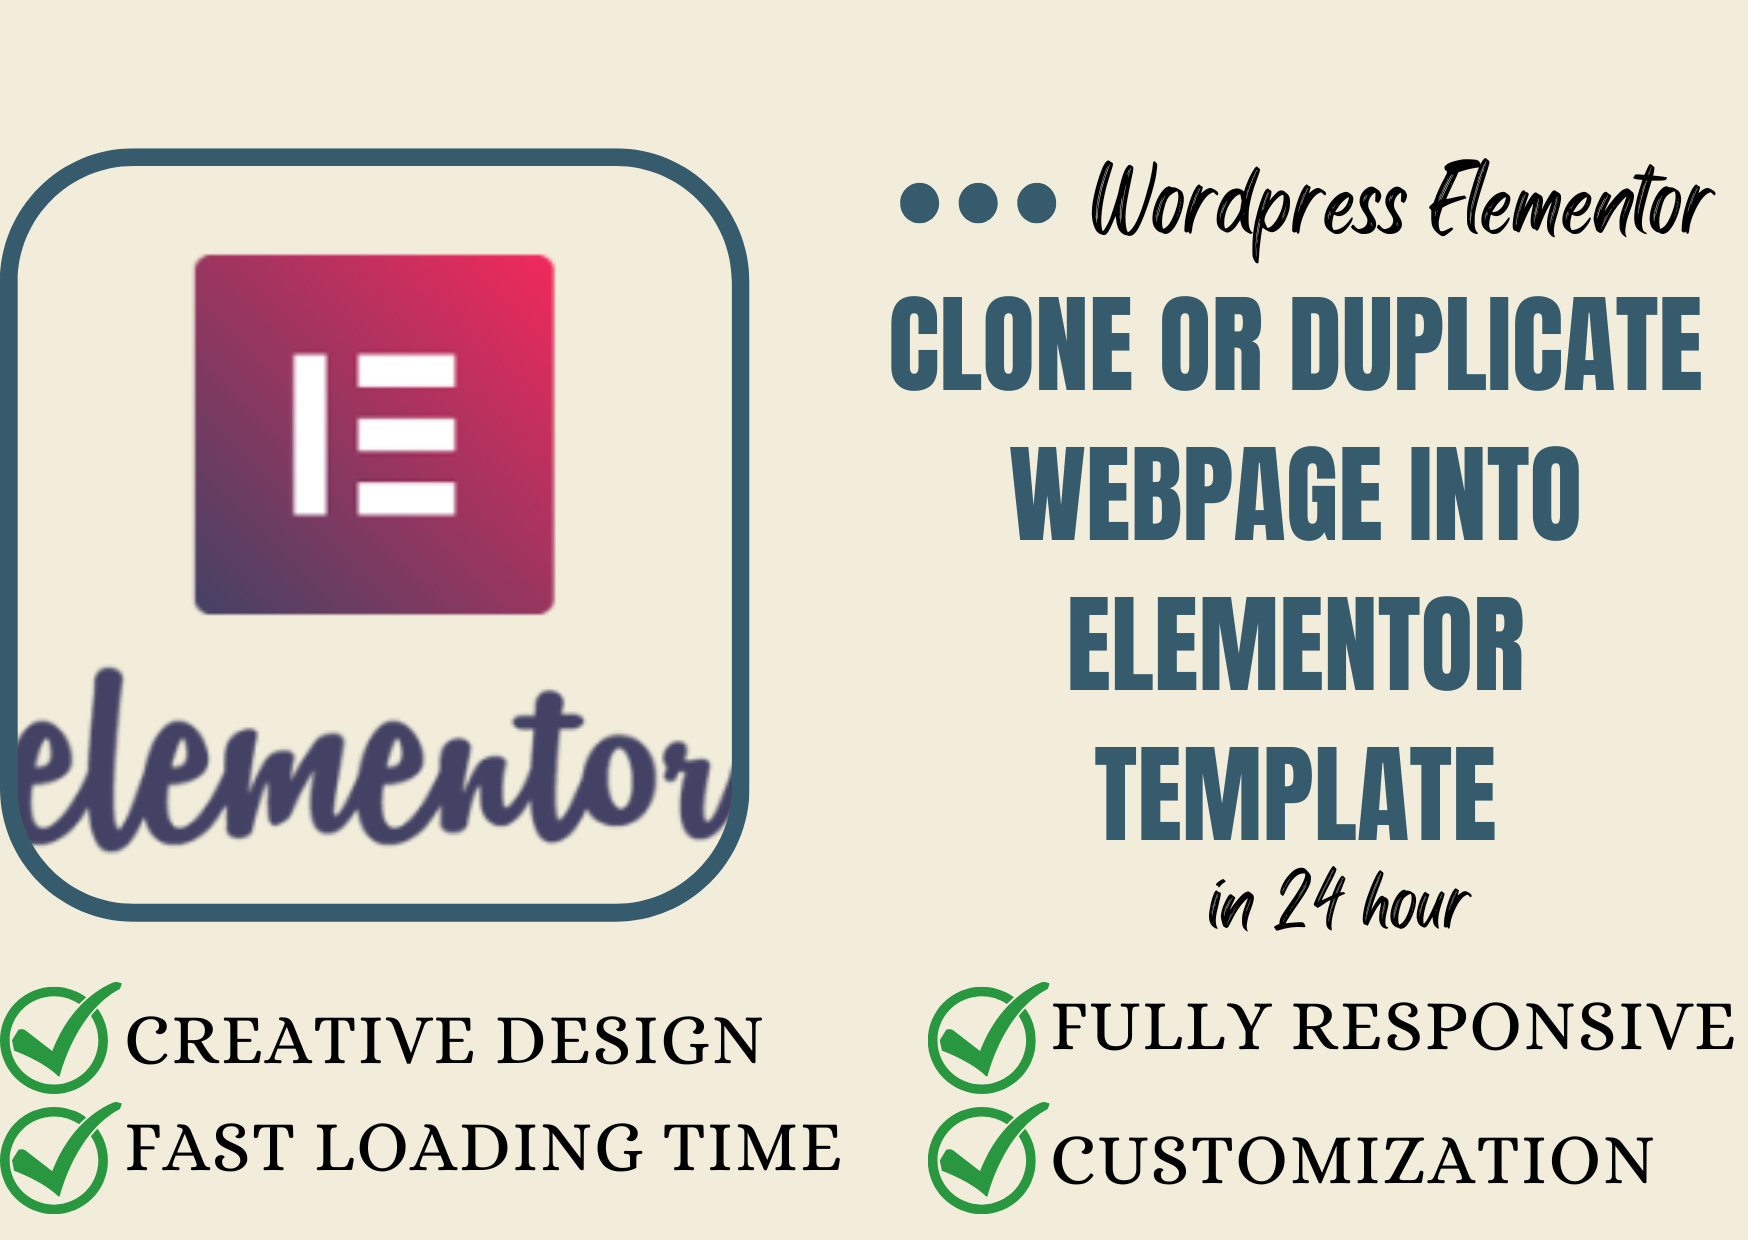 80093I will clone or duplicate webpage into elementor template